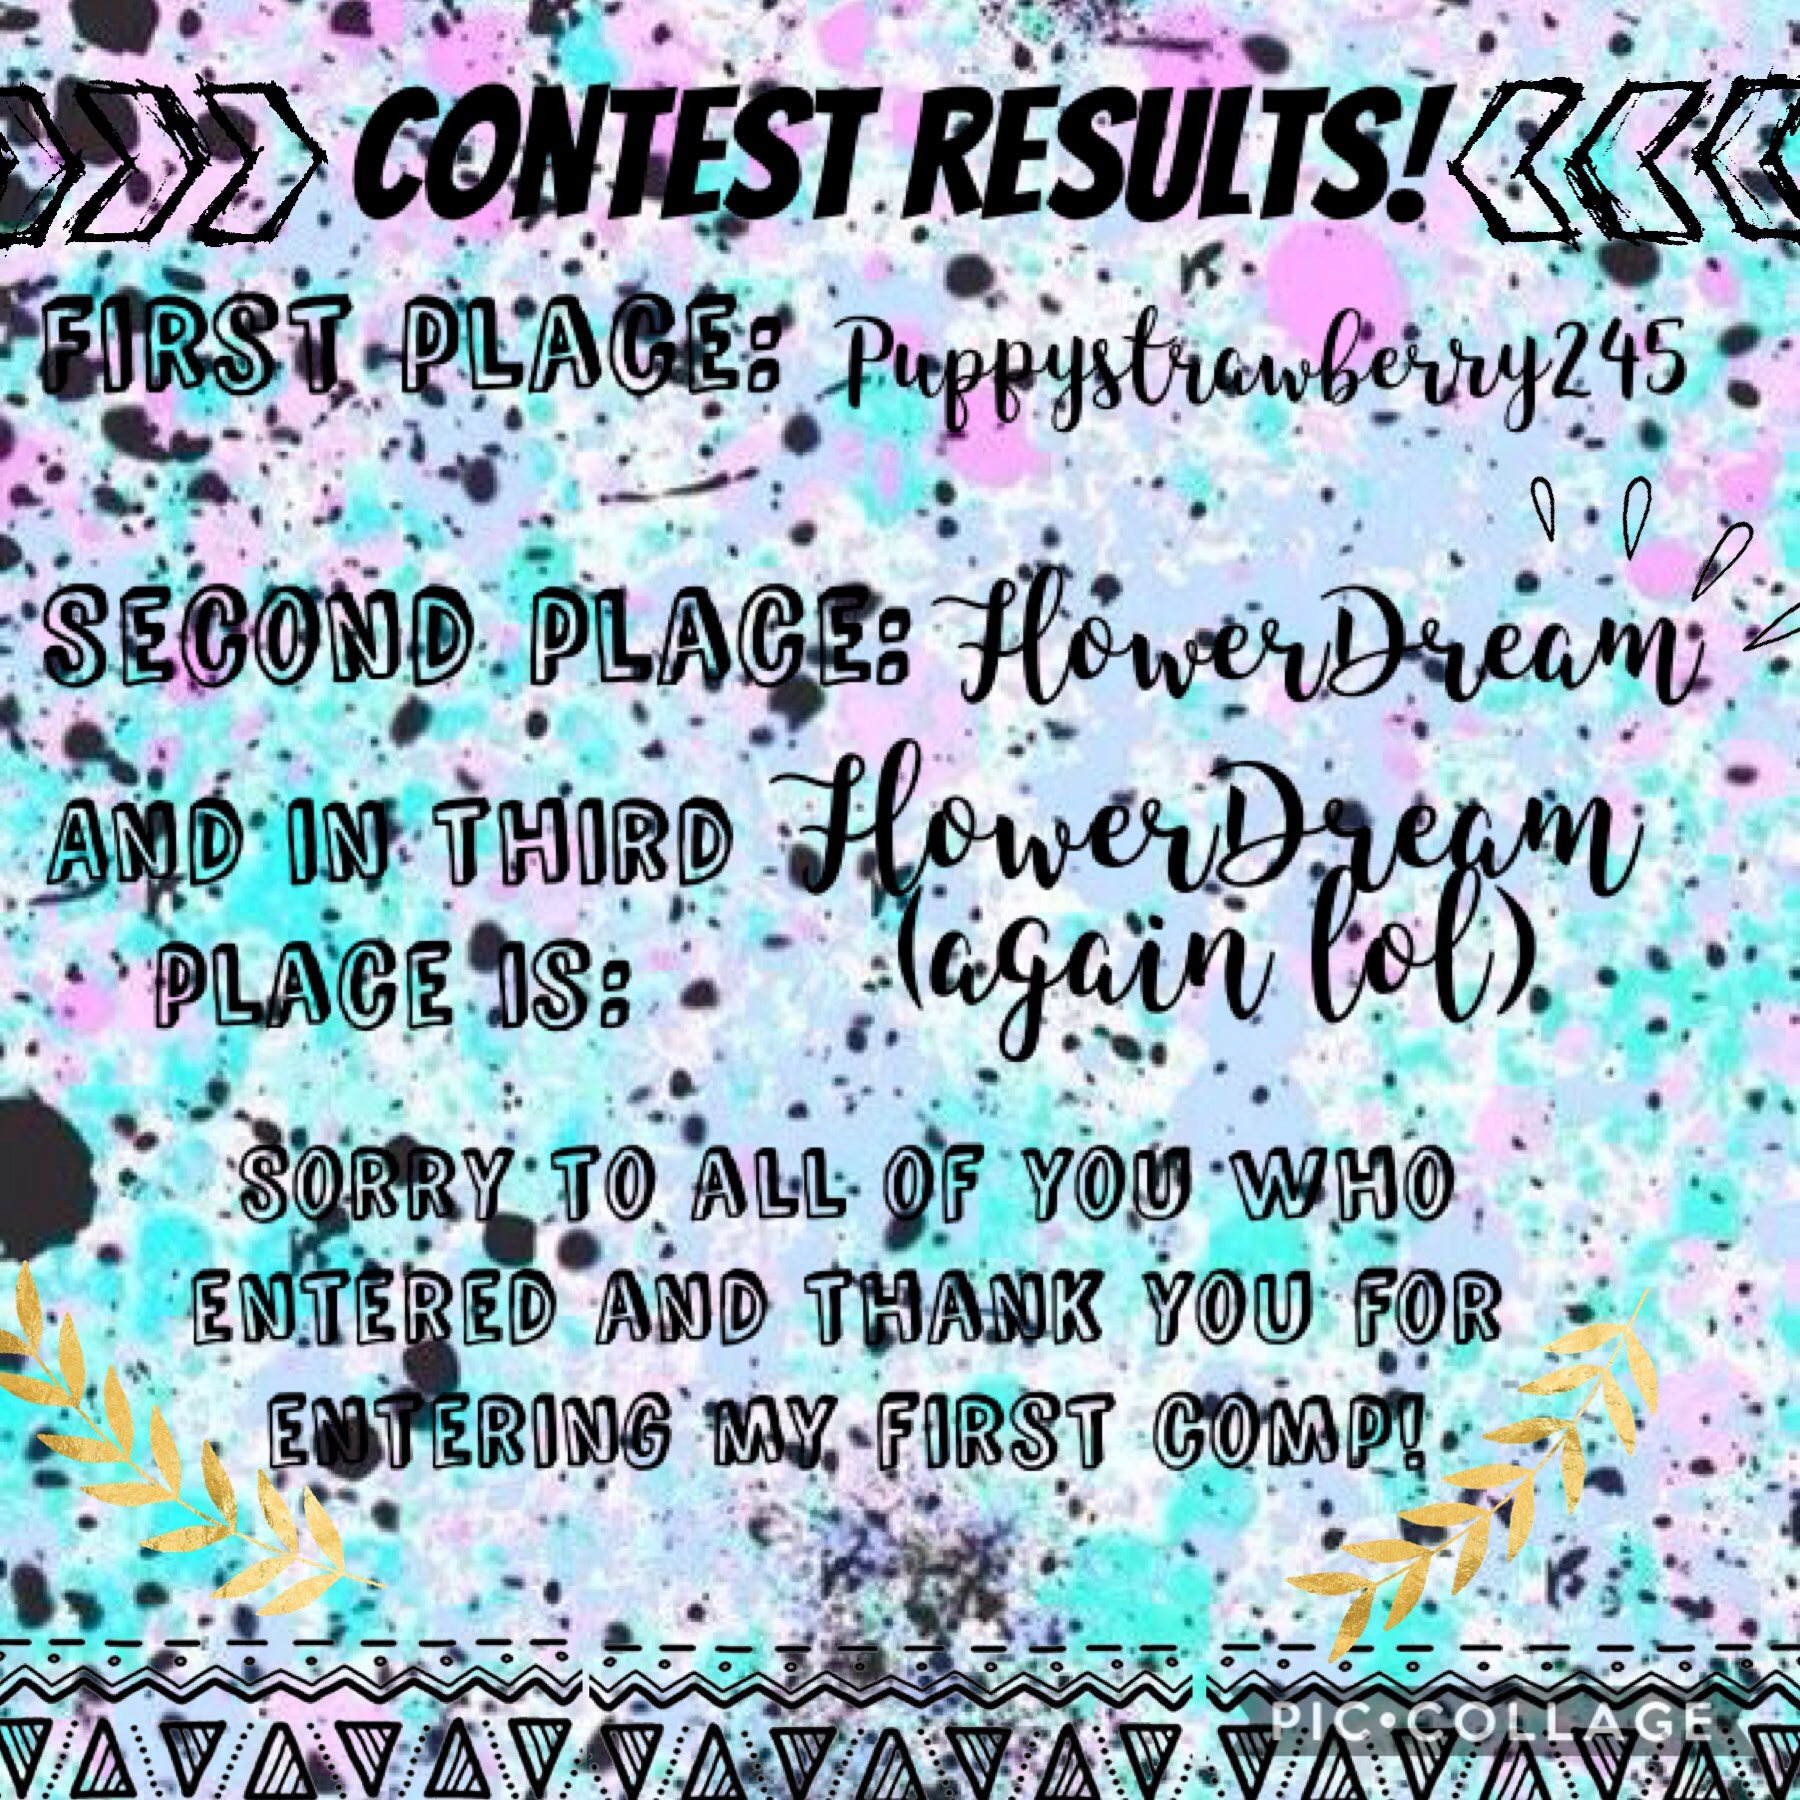 Thanks for every one who entered!

1st place gets a shout out and I'll use their entry as my icon!
2nd place gets a spam!
3rd place (same person lol 😂) gets a thank you for entering lol 😂 